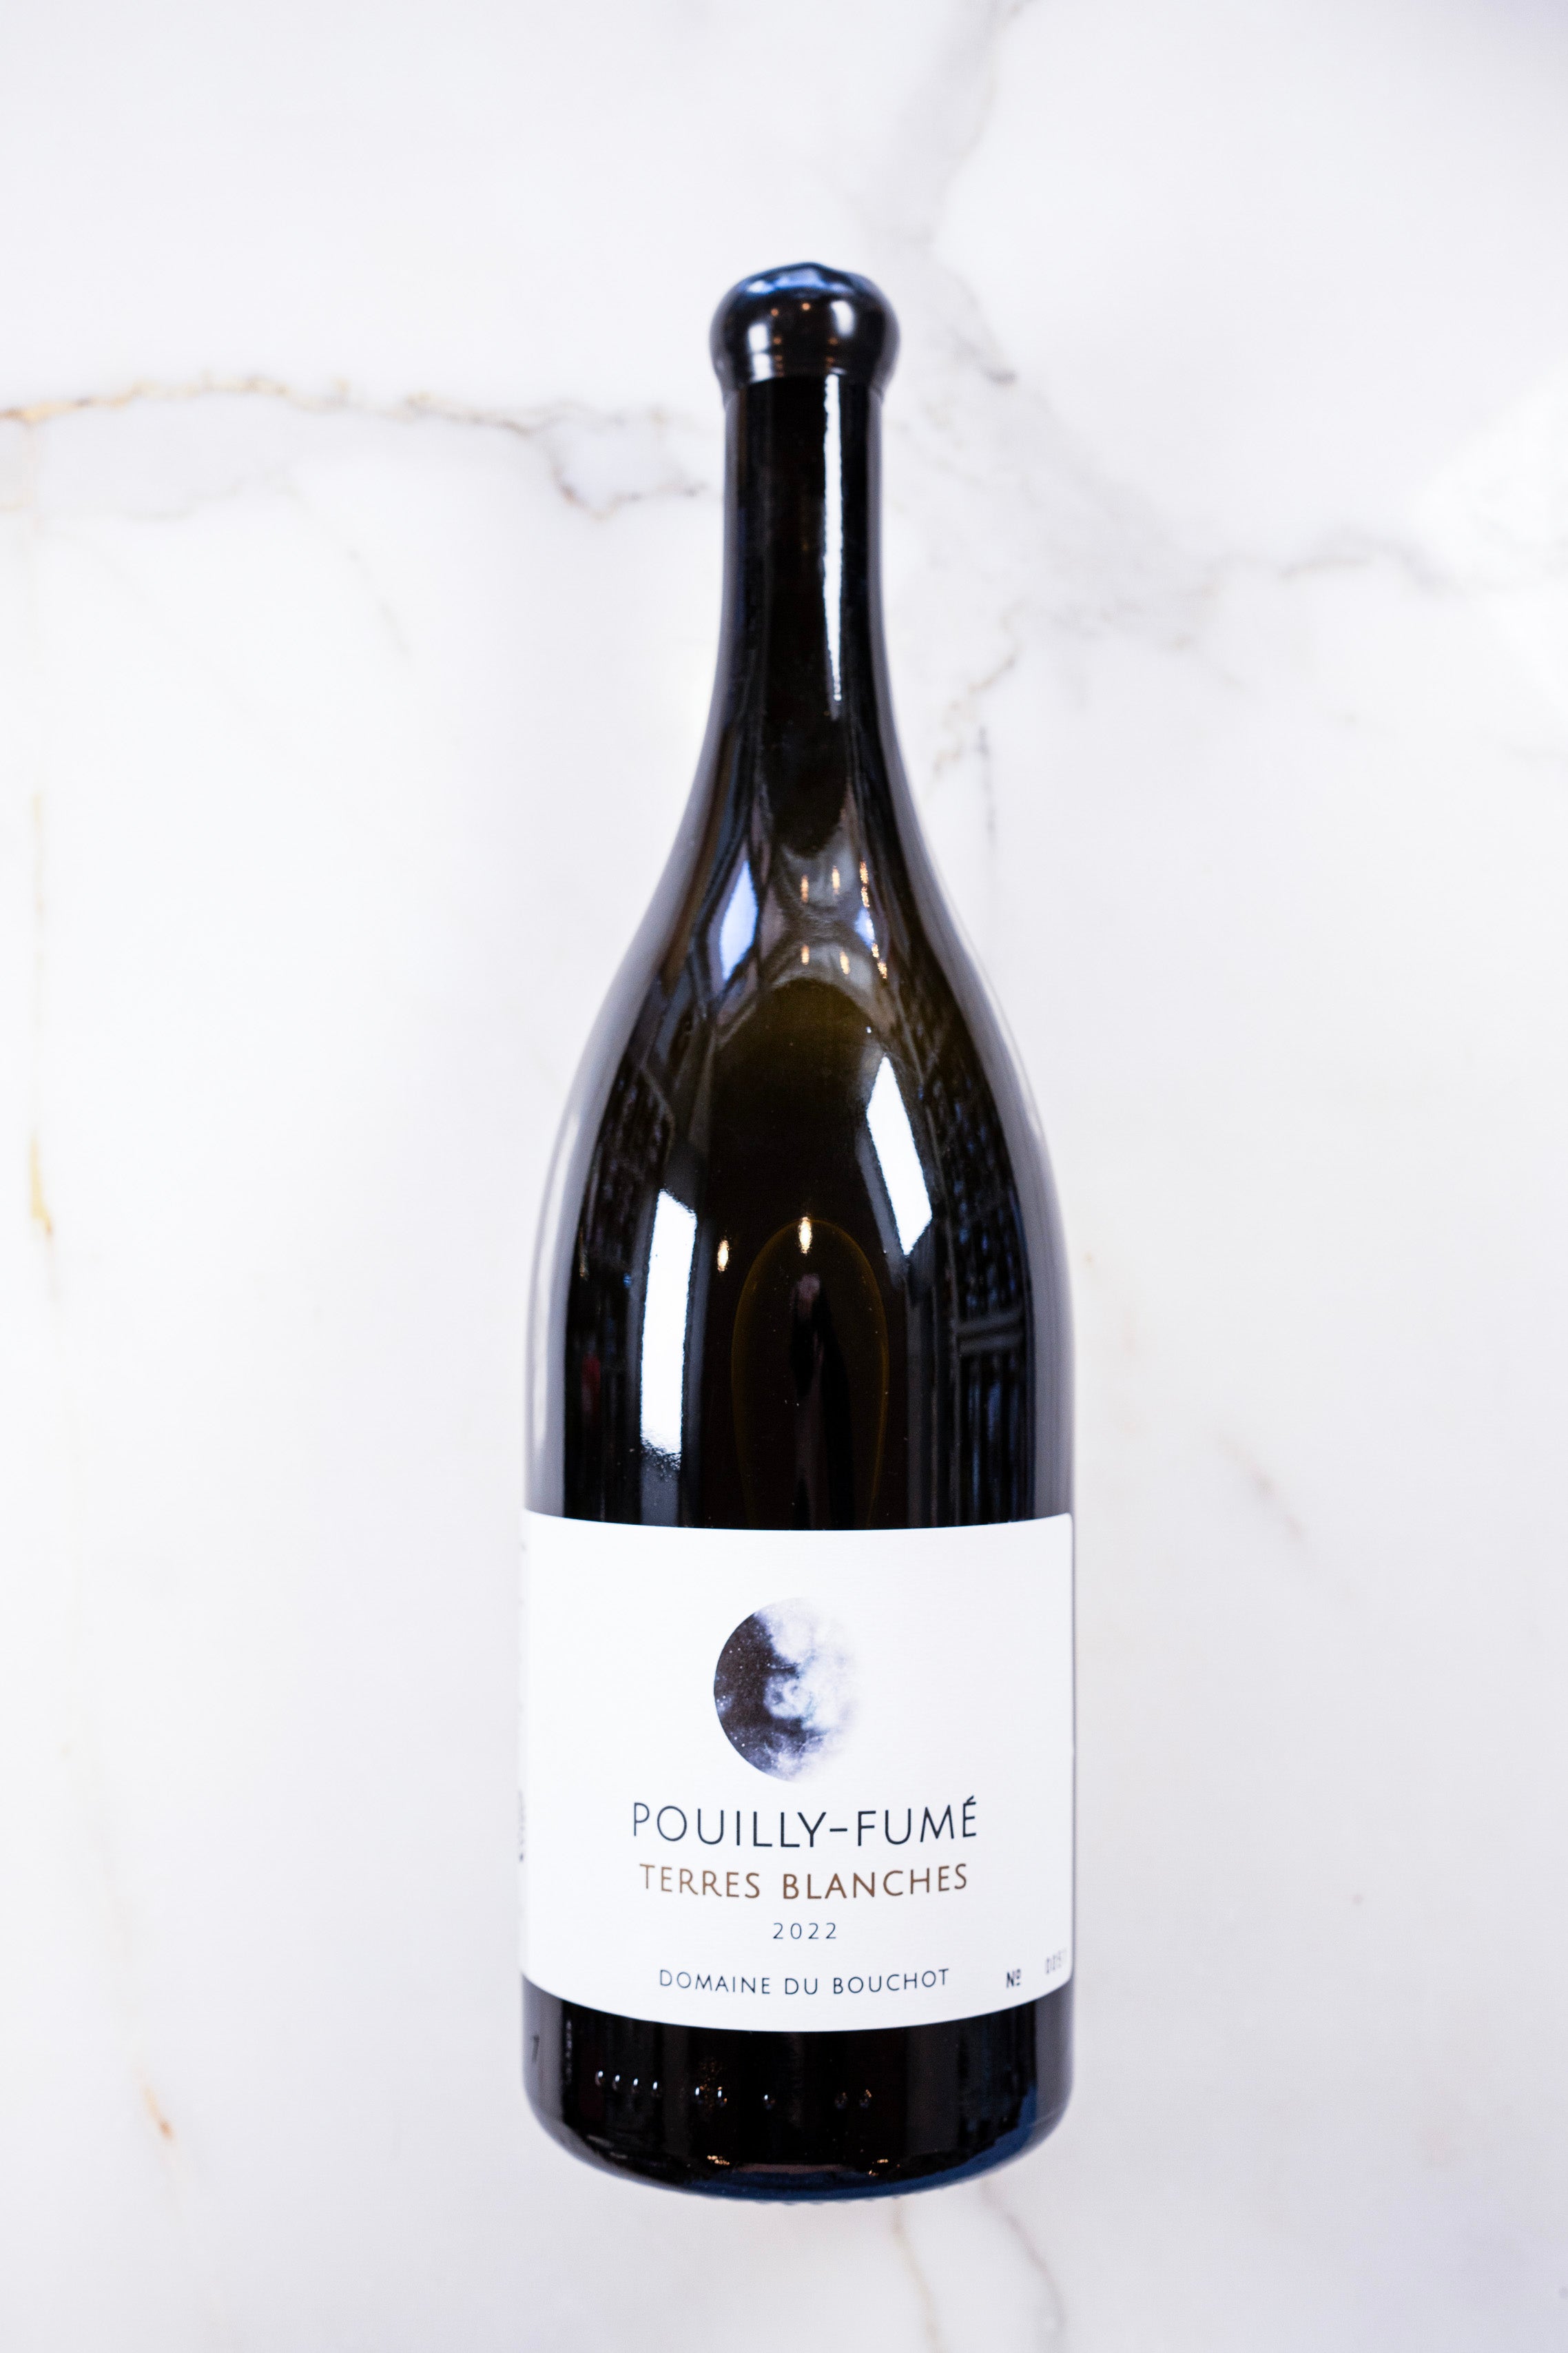 Domaine du Bouchot, Pouilly-Fume Terres Blanches (2022)